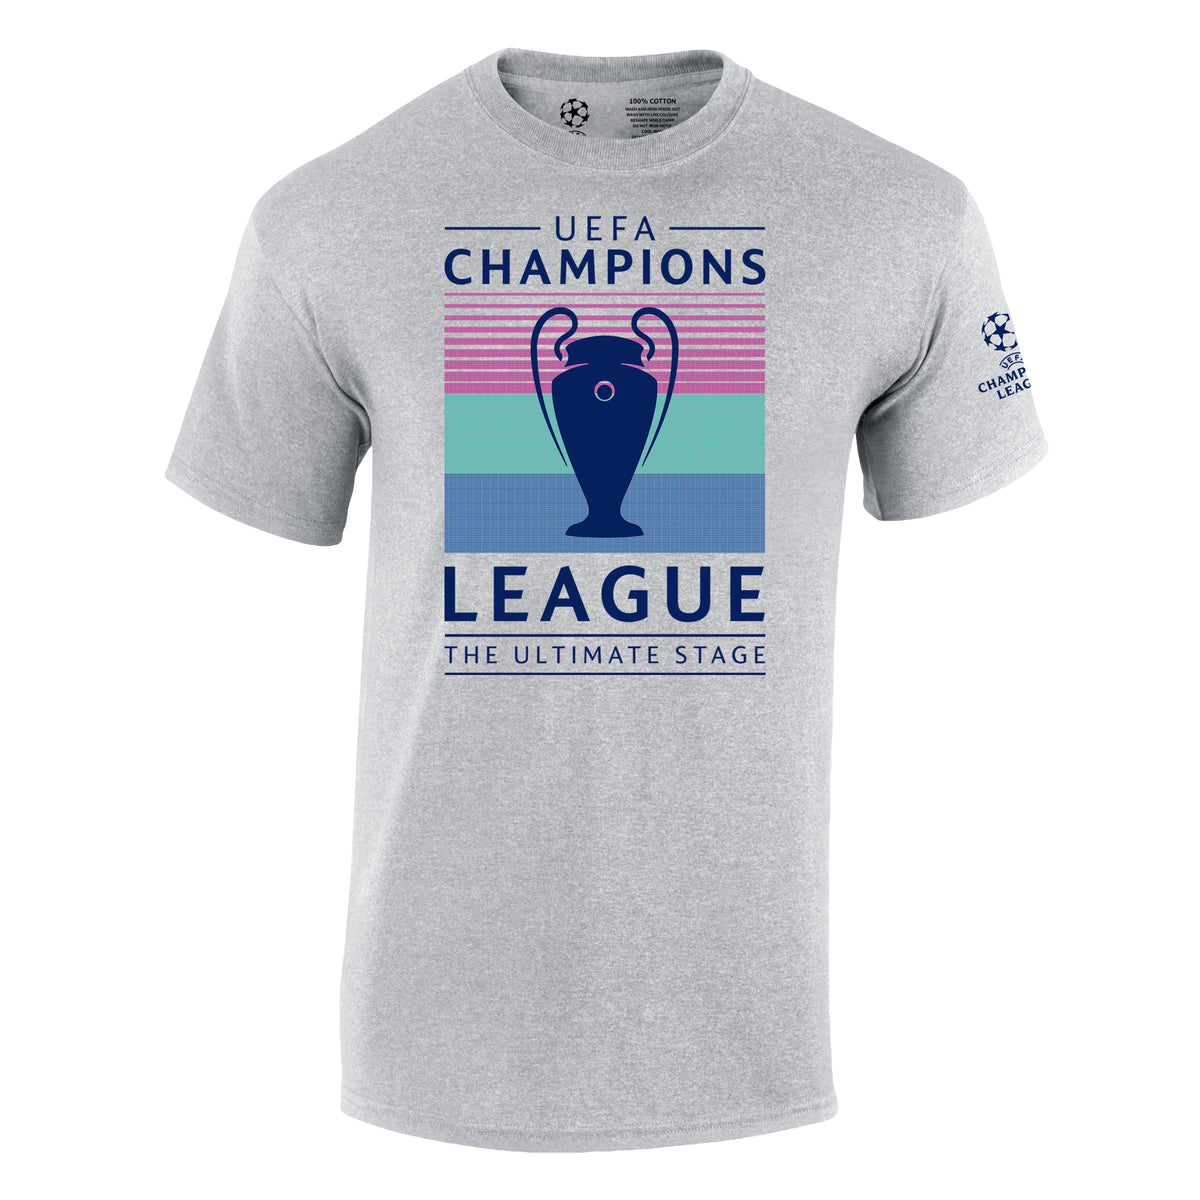 Champions League 'The Ultimate Stage' T-Shirt Heather Grey